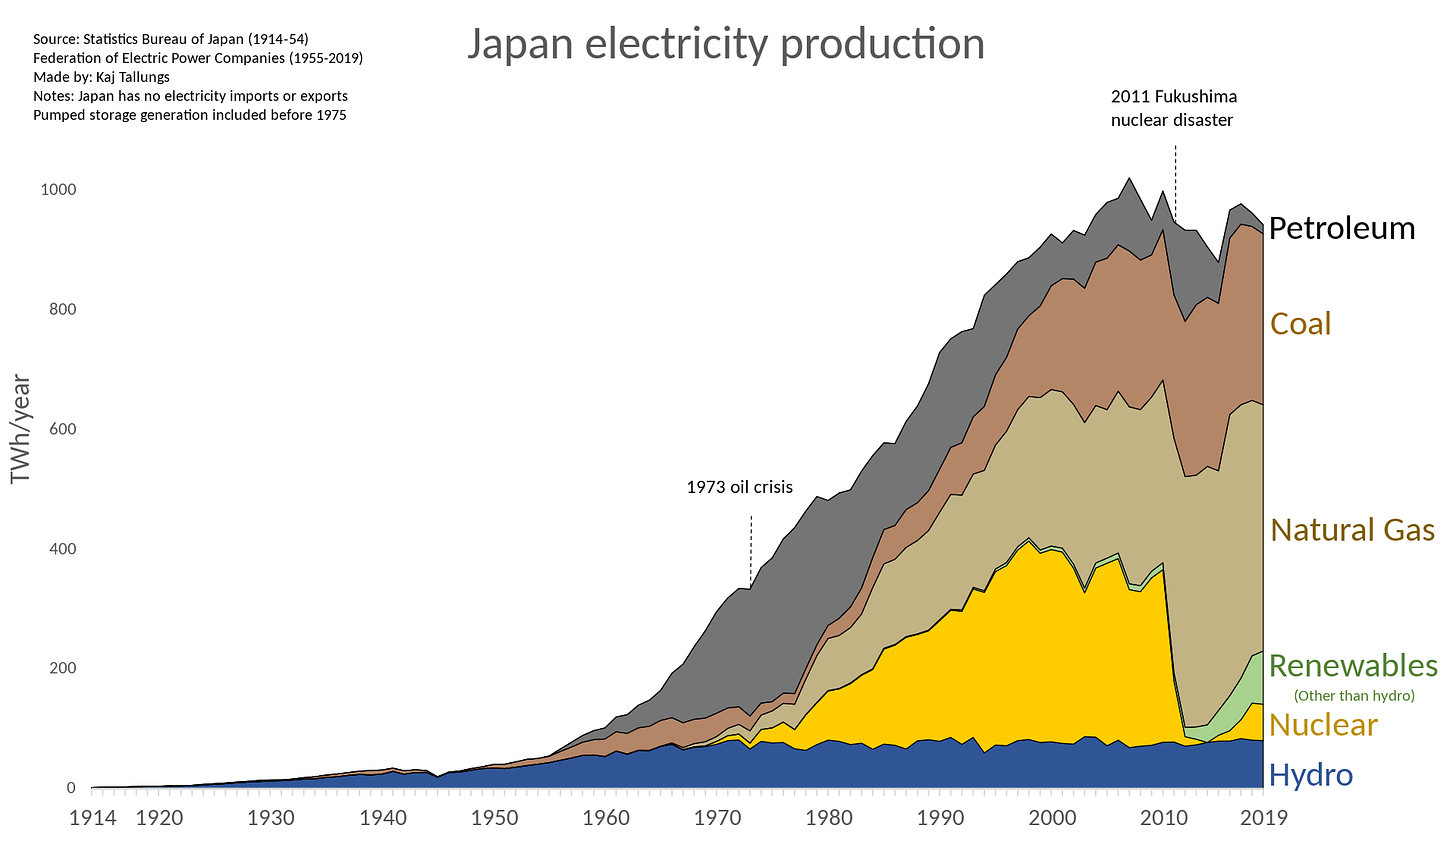 Graph showing the generation sources of electricity in Japan from 1914 to 2019